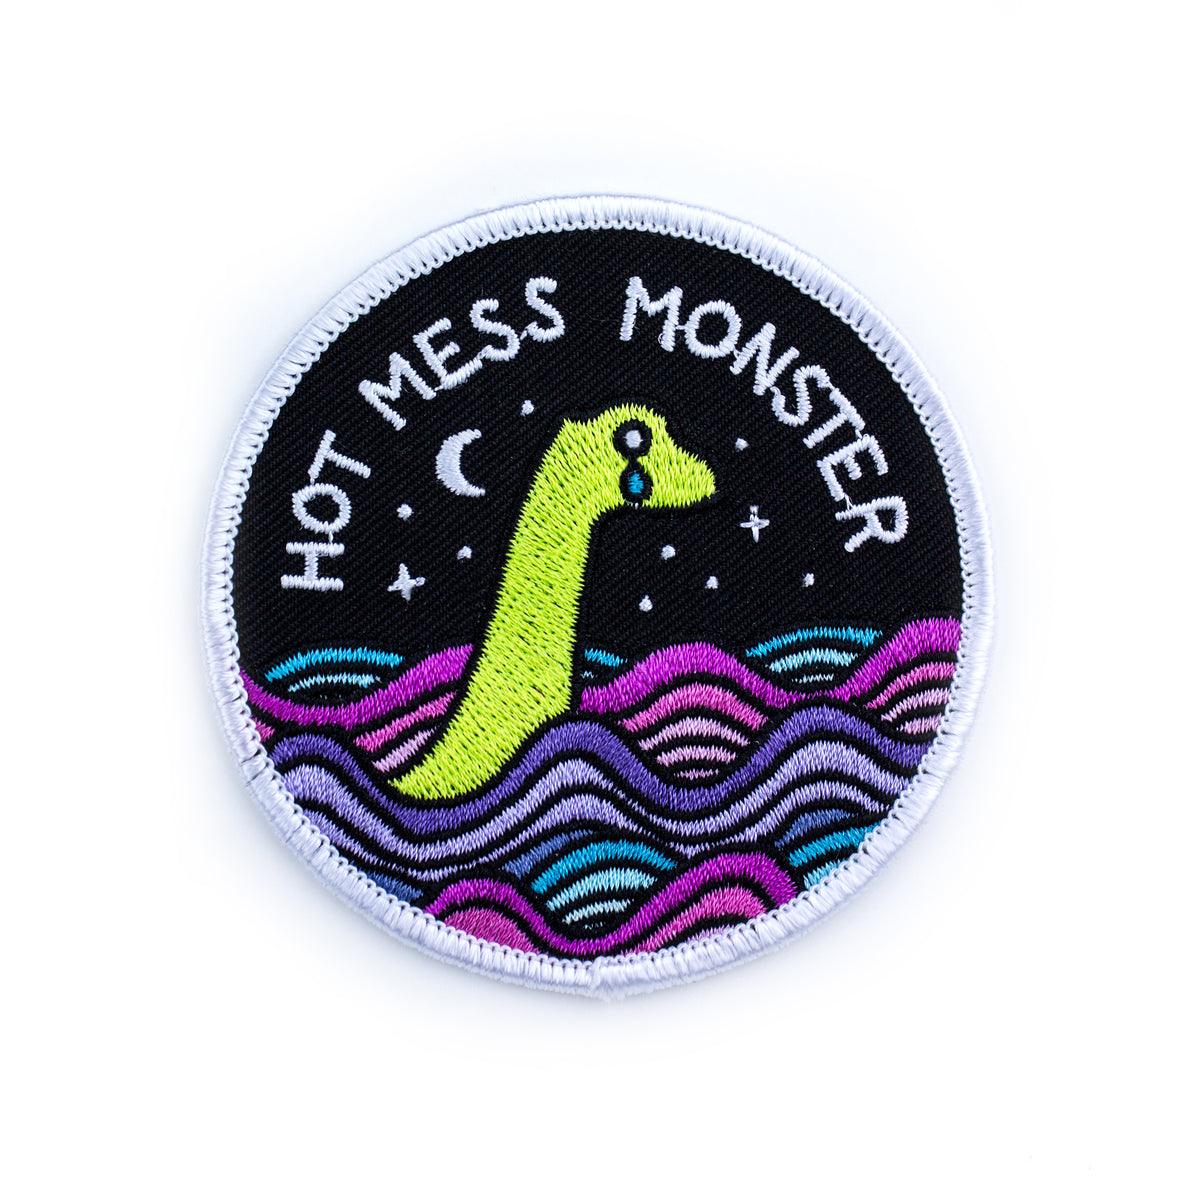 HOT MESS MONSTER - NESSIE // PATCH